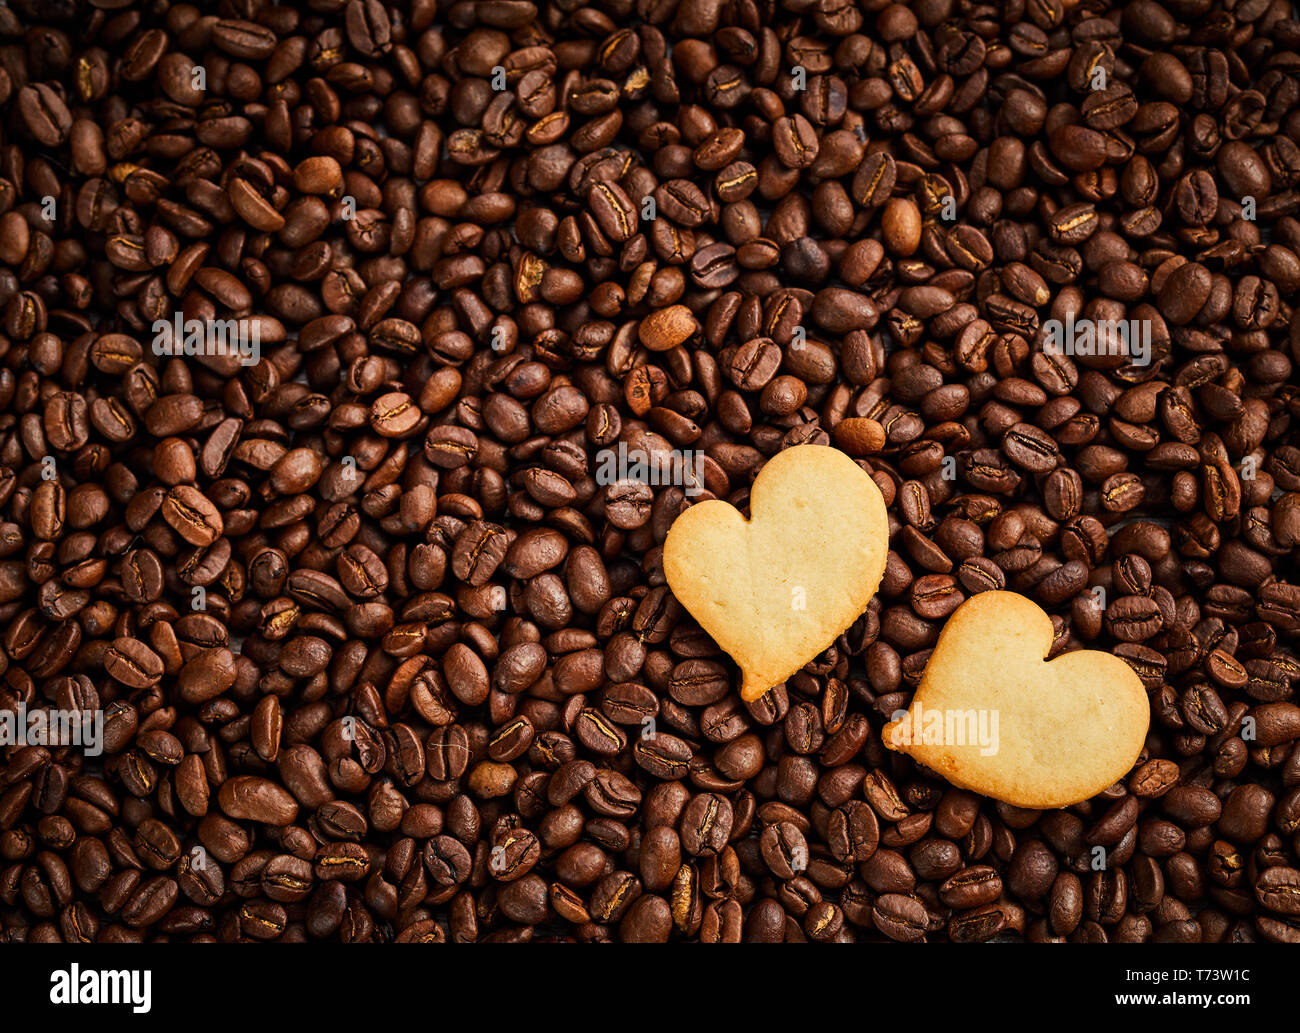 Roasted coffee bean background with fresh pastries or heart-shaped biscuits in the corner conceptual of love, like, friendship or Valentines Day Stock Photo